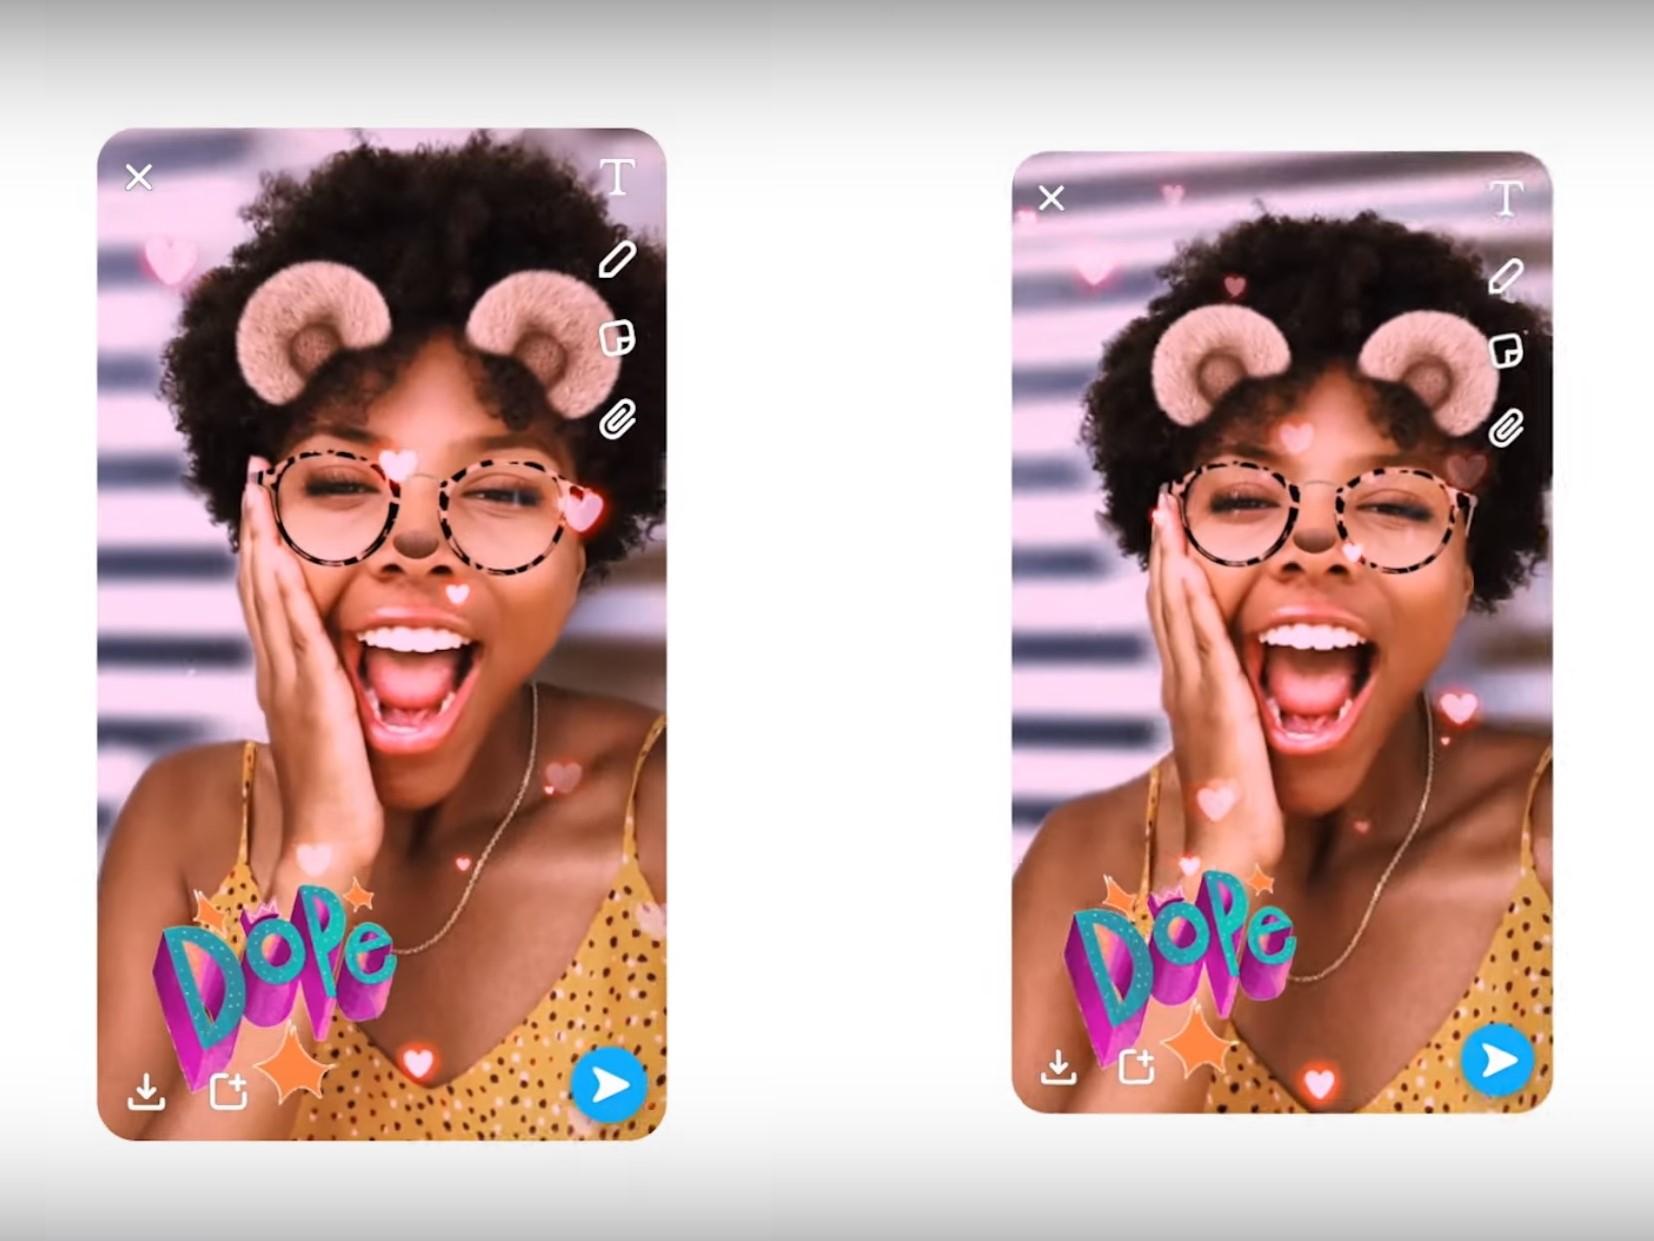 The new Snapchat camera feature only works with newer iPhones